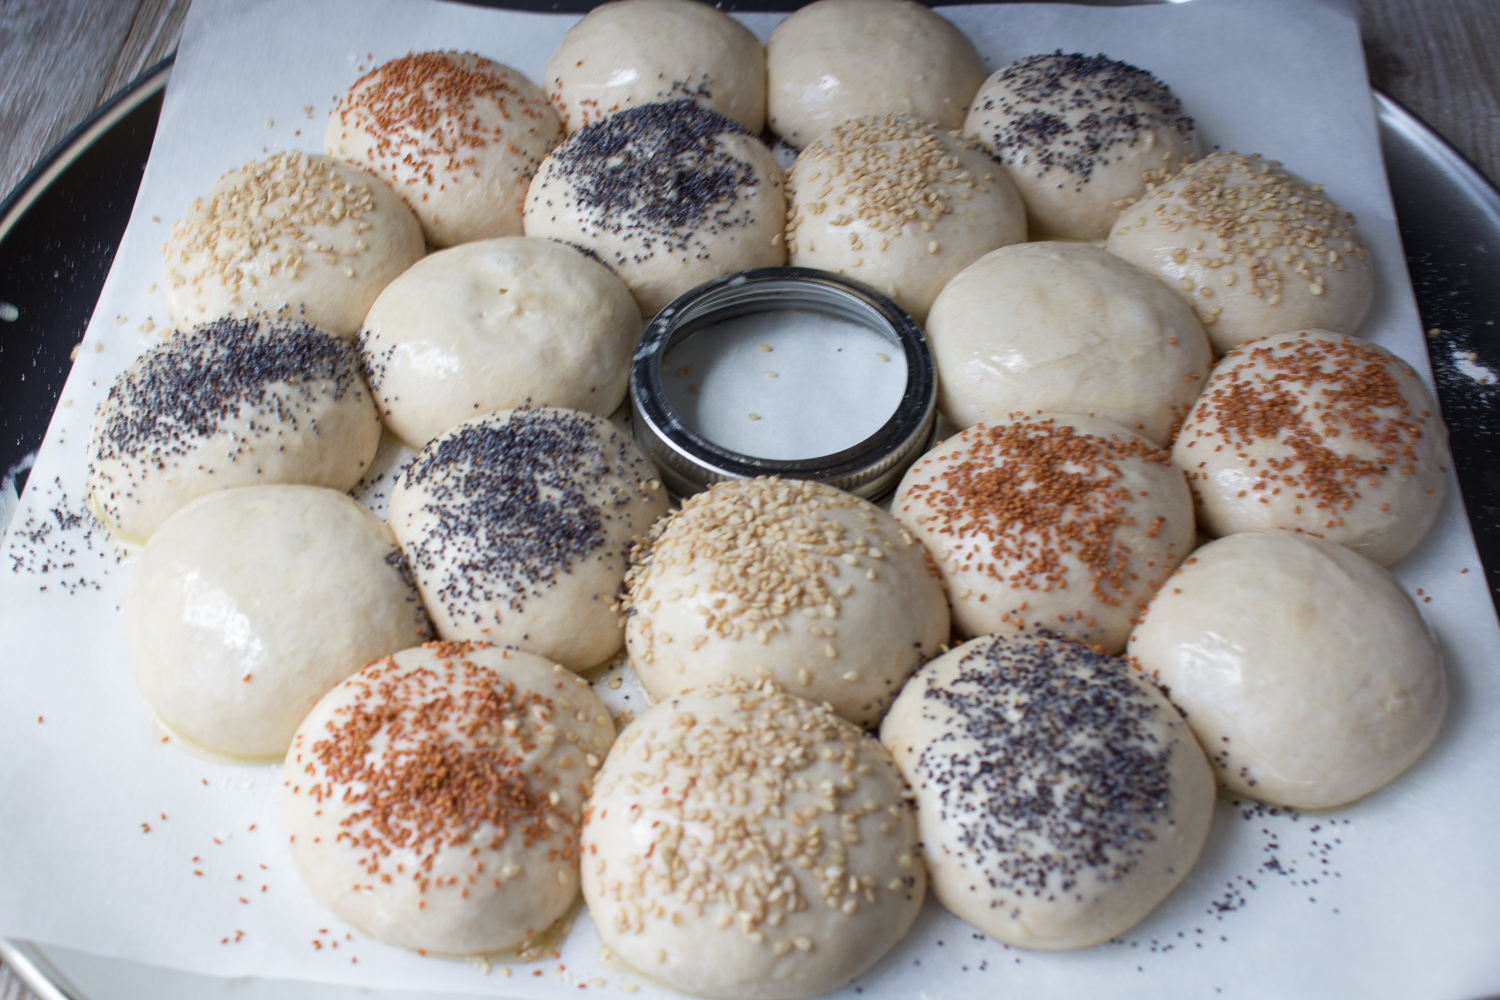 Sourdough rolls sprinkled with seeds